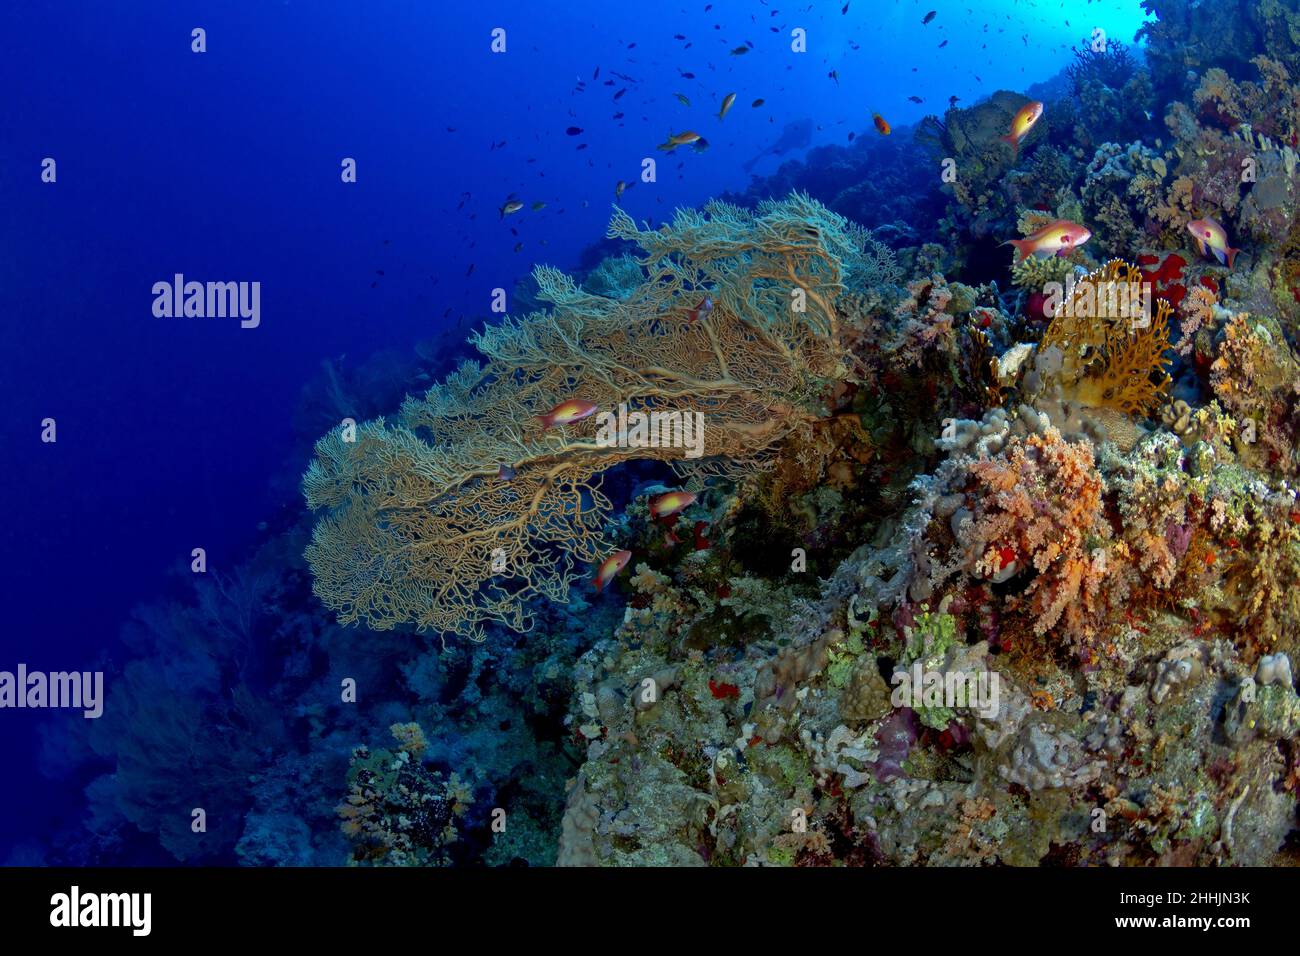 Tiny bright reef fish swimming around Alcyonacea gorgonian coral reefs in clean blue seawater of Red Sea Stock Photo